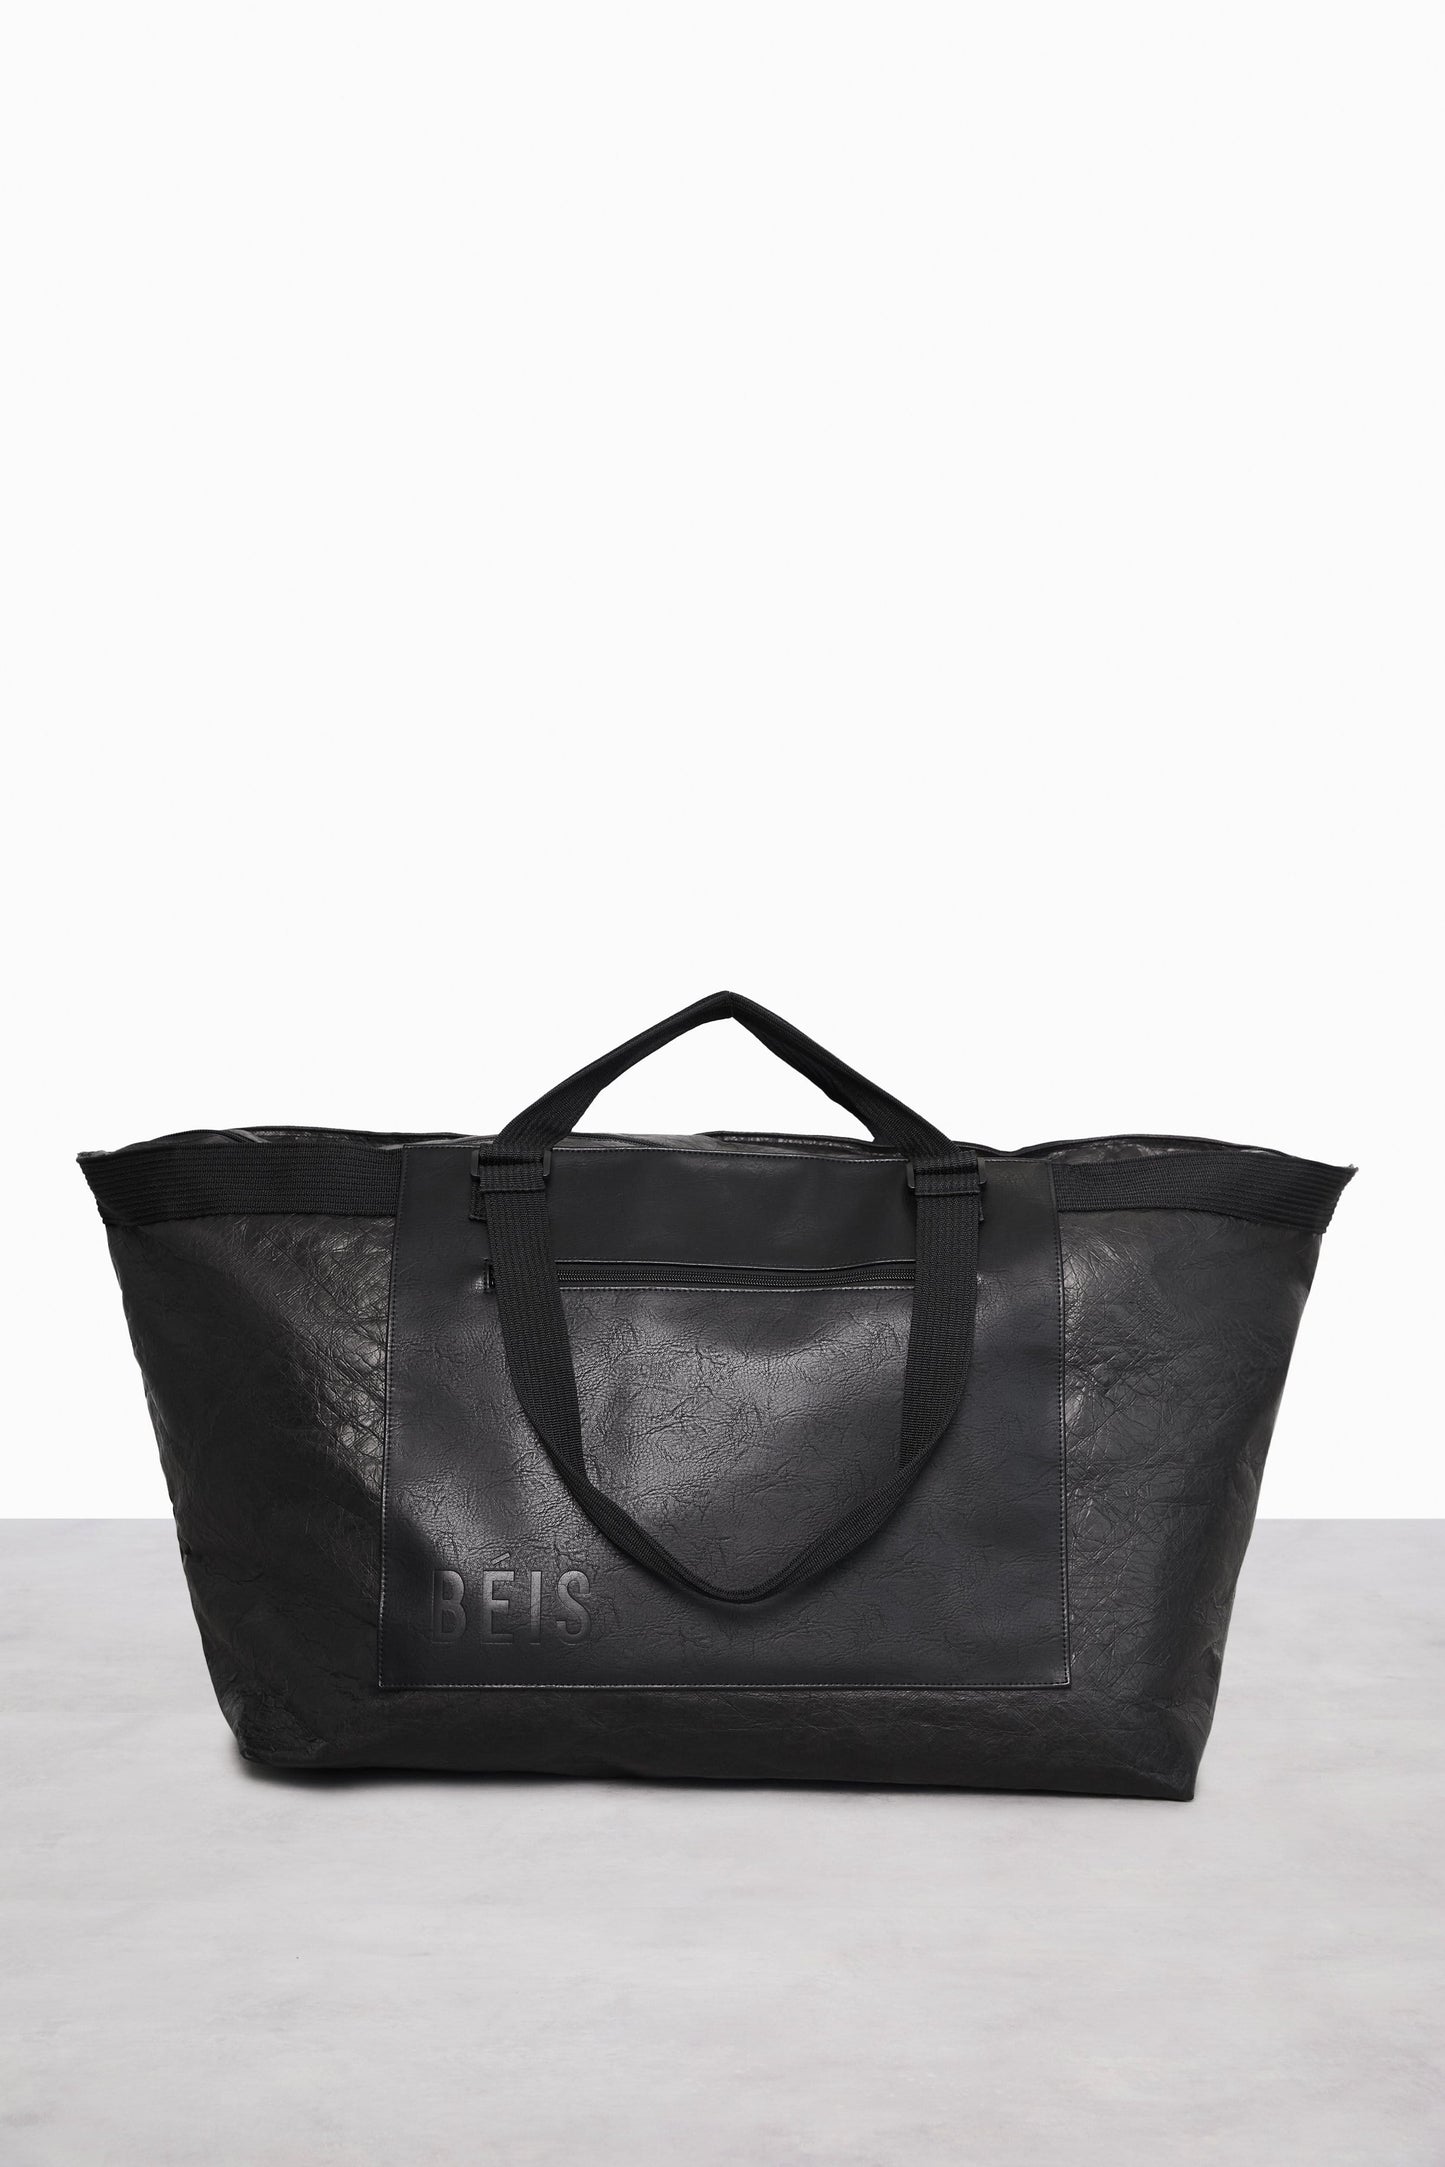 Extra Large Tote Black Front